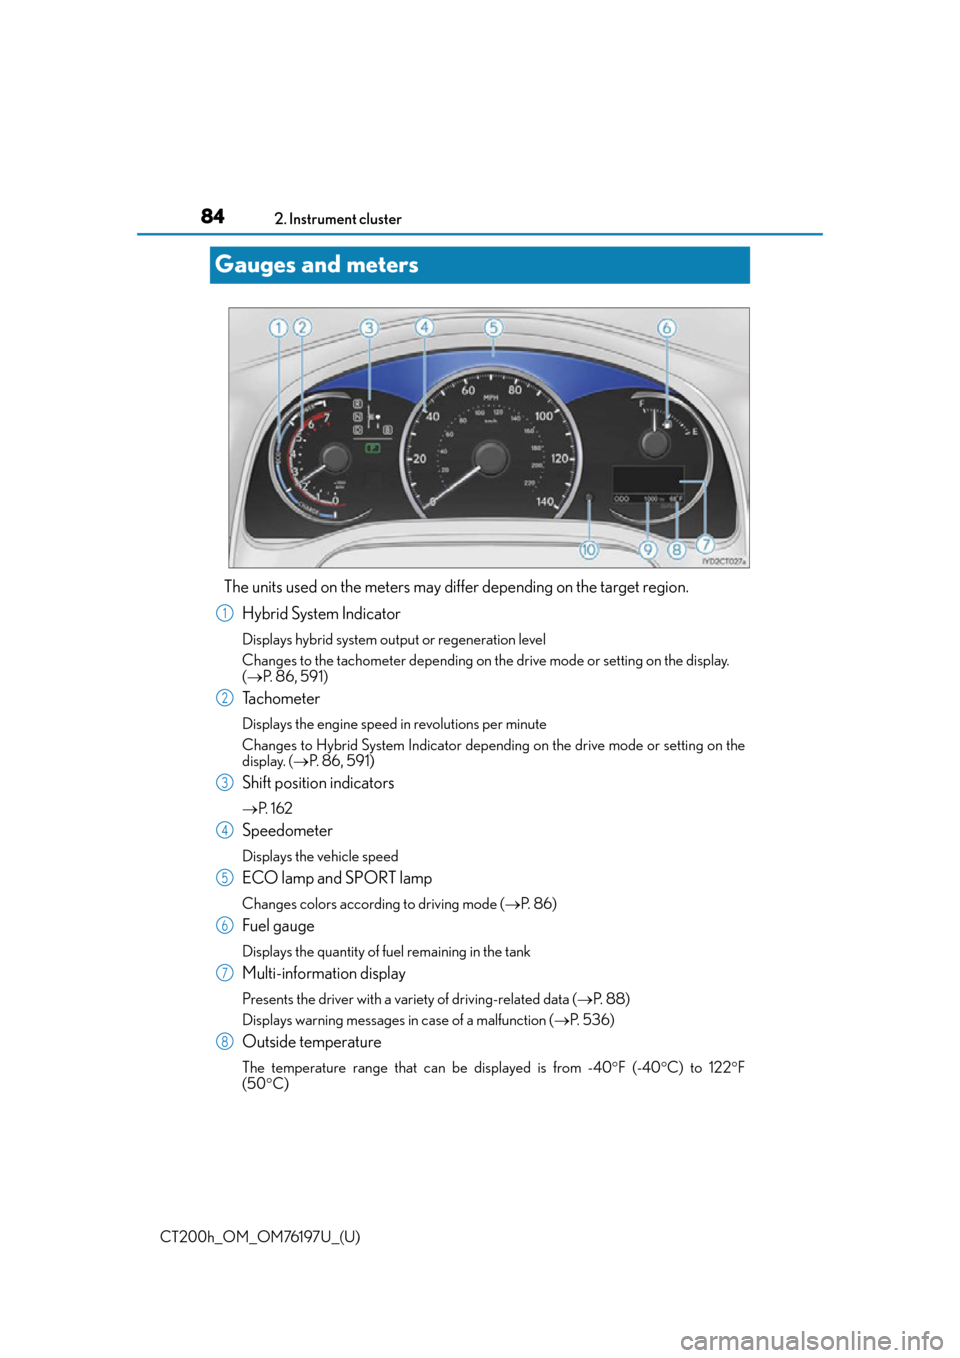 Lexus CT200h 2016  Owners Manual (in English) 84
CT200h_OM_OM76197U_(U)2. Instrument cluster
Gauges and meters
The units used on the meters may diff
er depending on the target region.
Hybrid System Indicator
Displays hybrid system output or regen